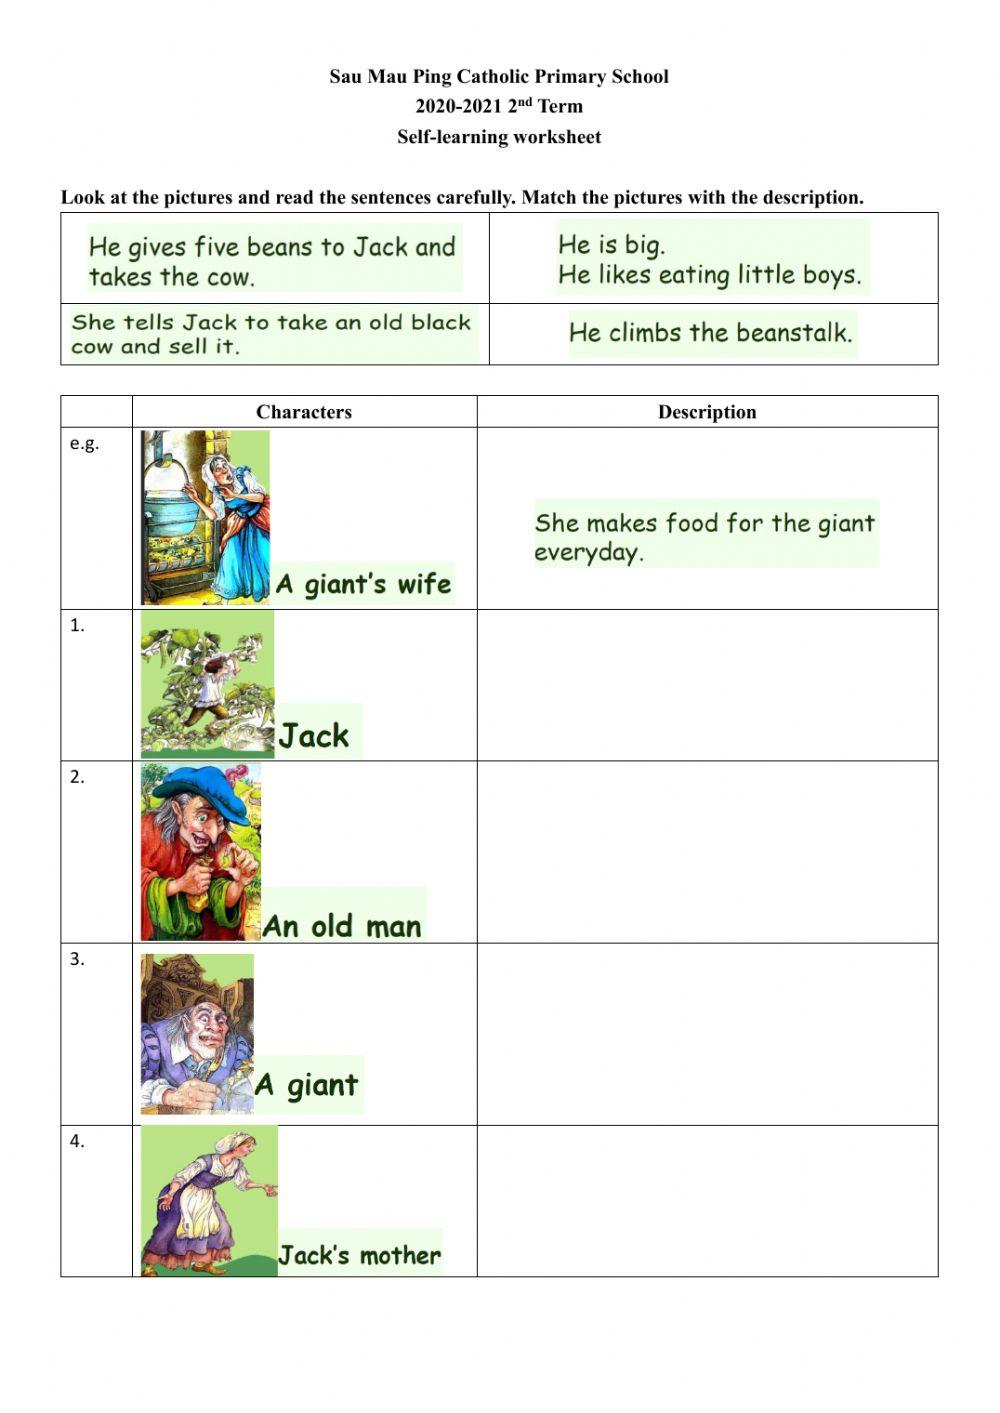 Self-learning Worksheet (Jack and the Beanstalk)